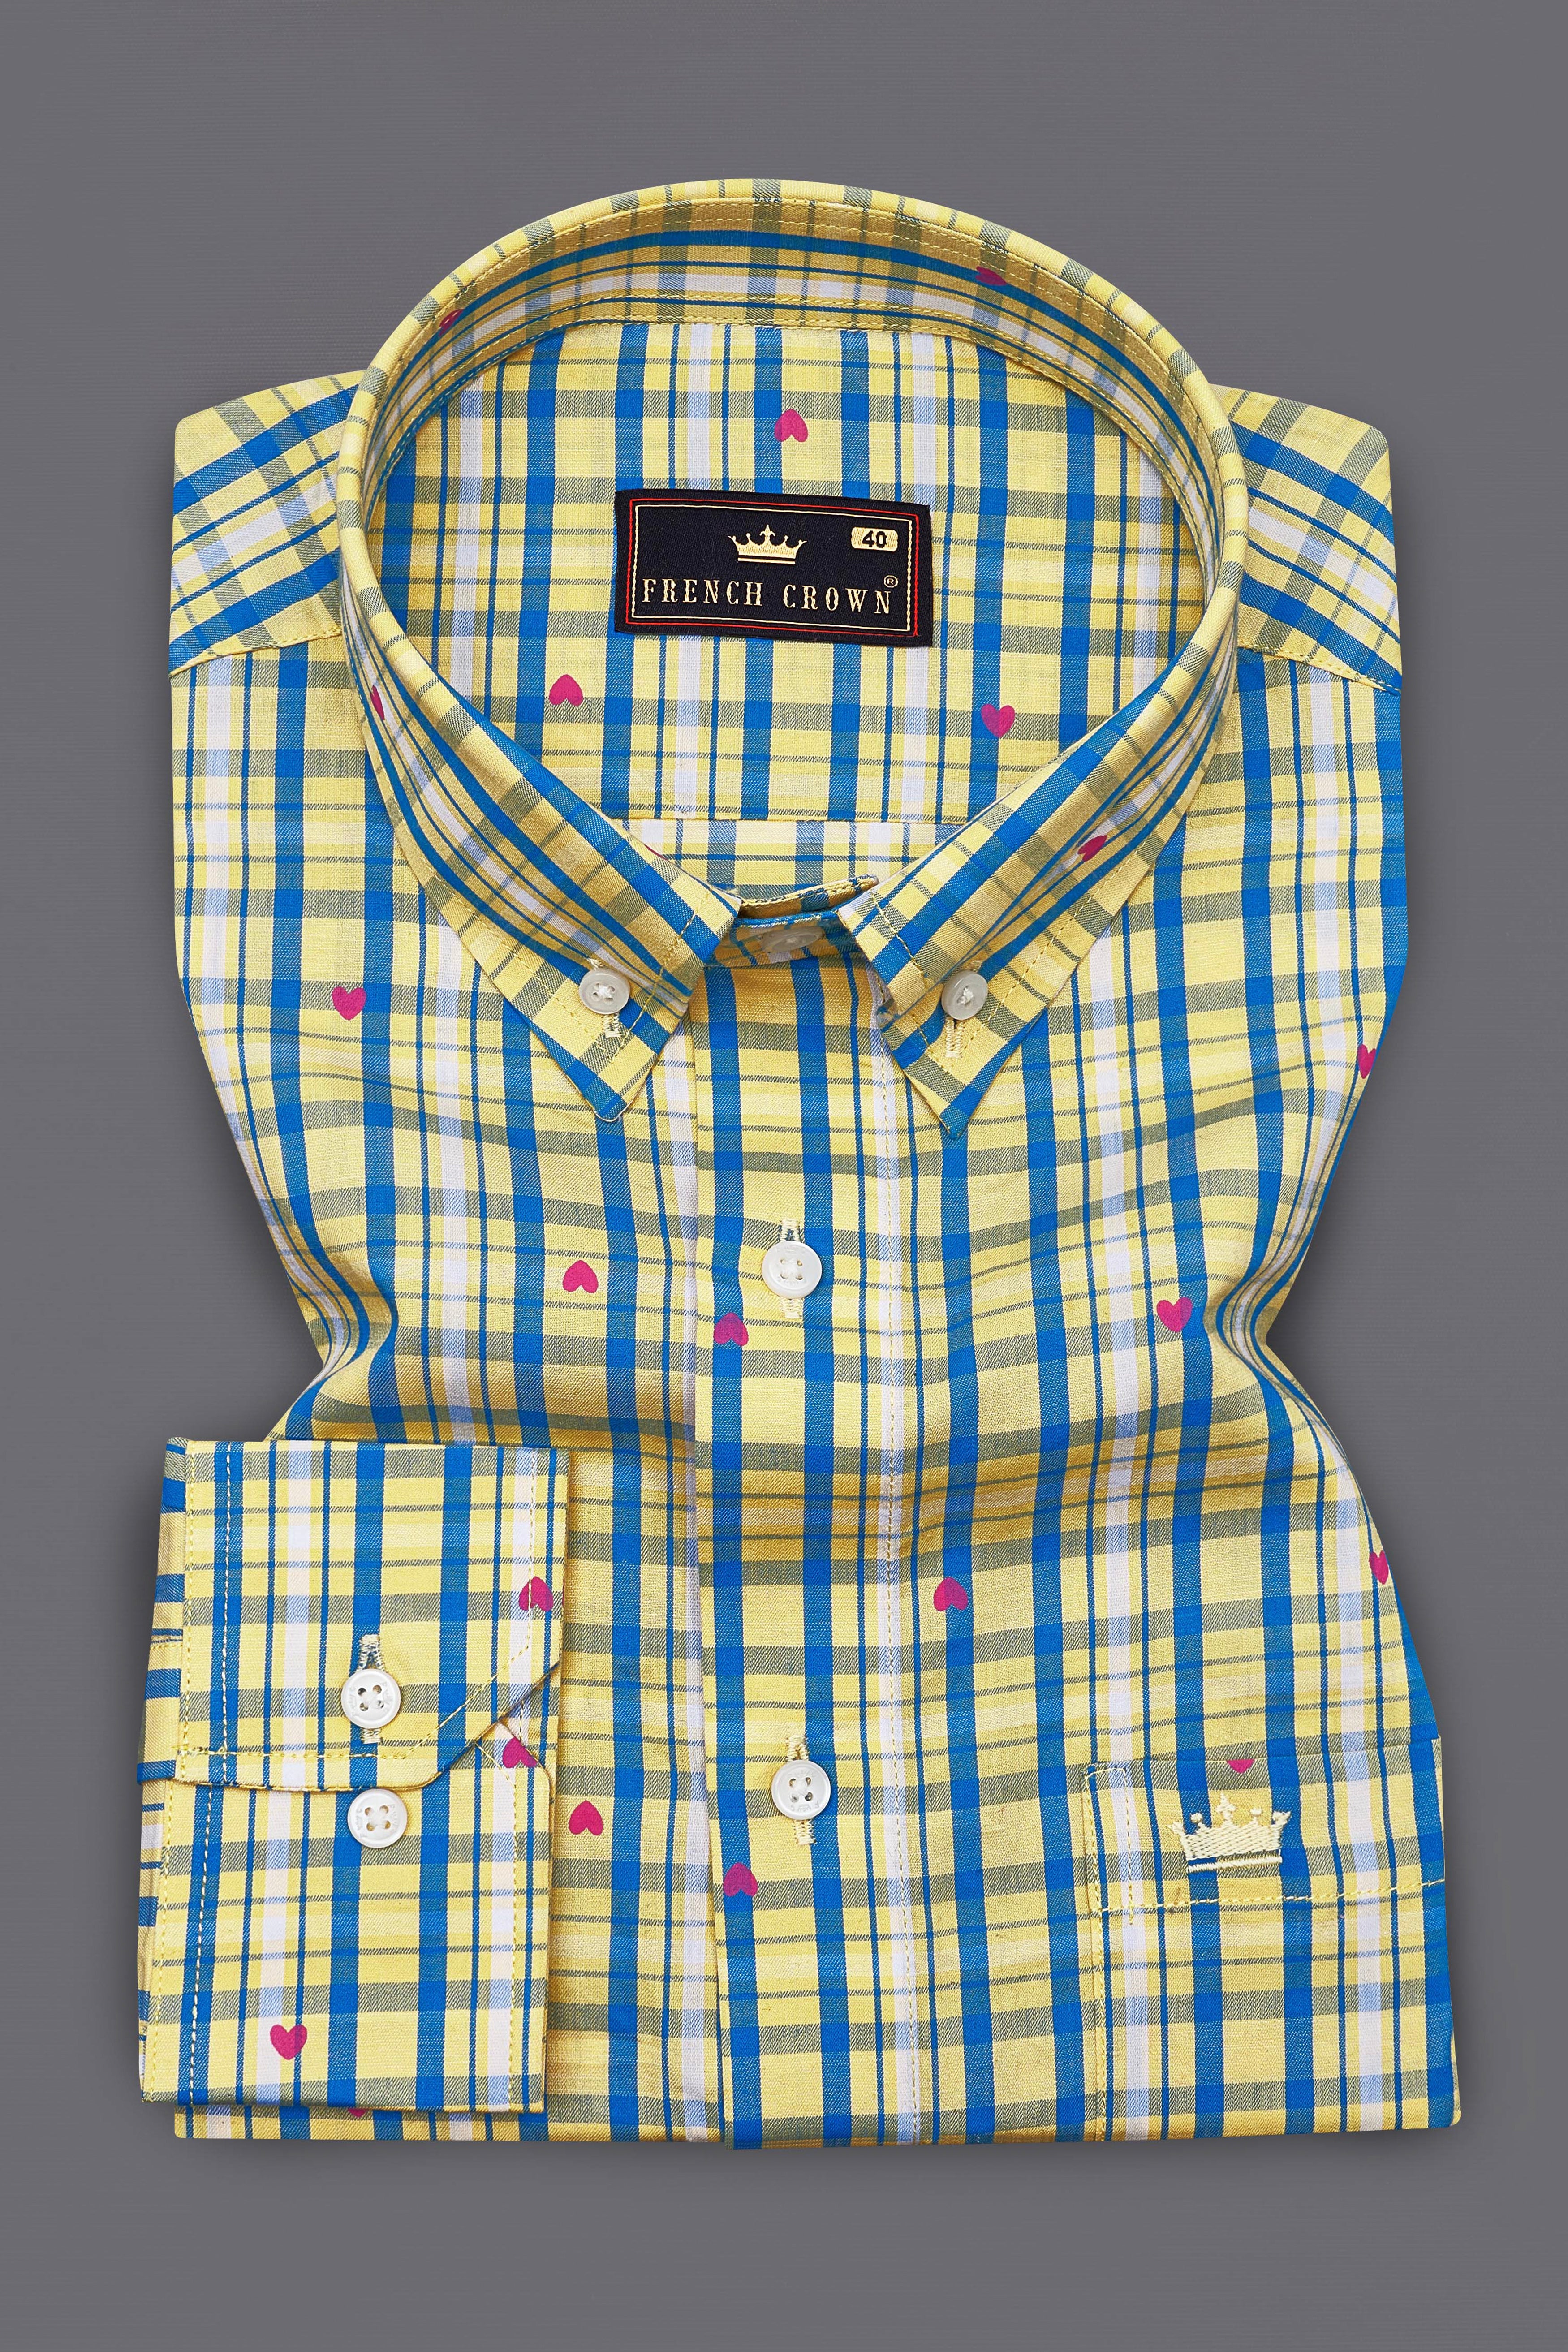 Marzipan Yellow with Matisse Blue Checkered with Heart Printed Premium Cotton Shirt